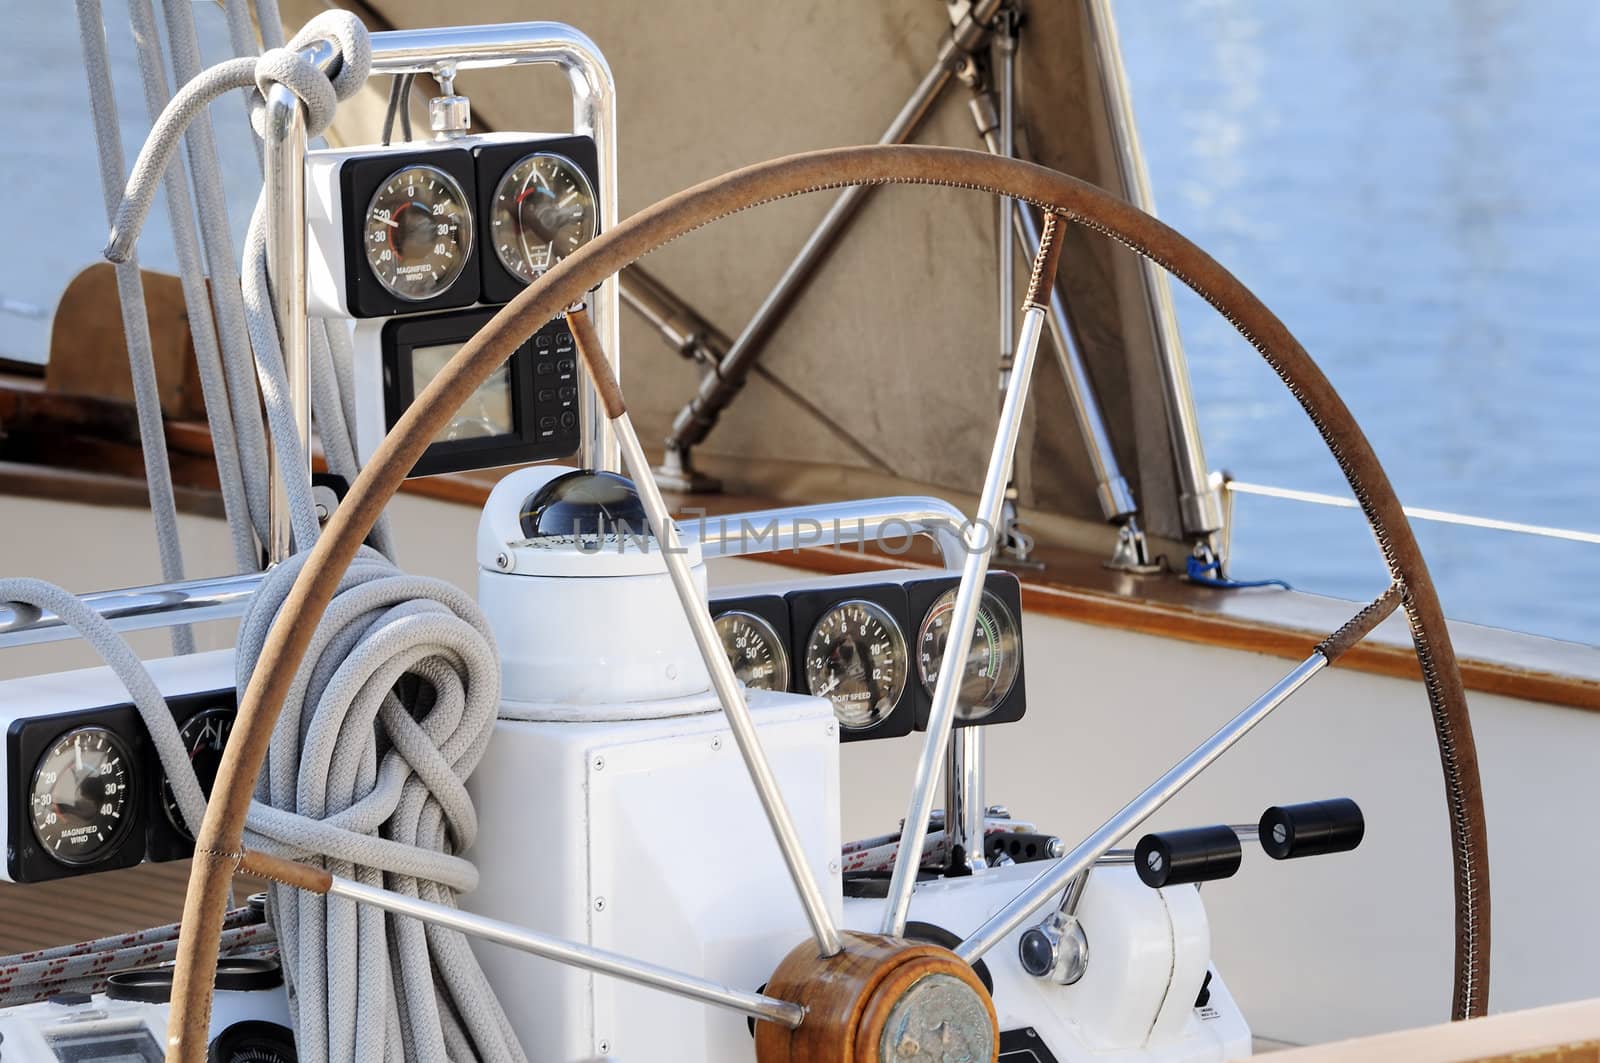 detail of steering wheel and navigation instruments of a sailboat